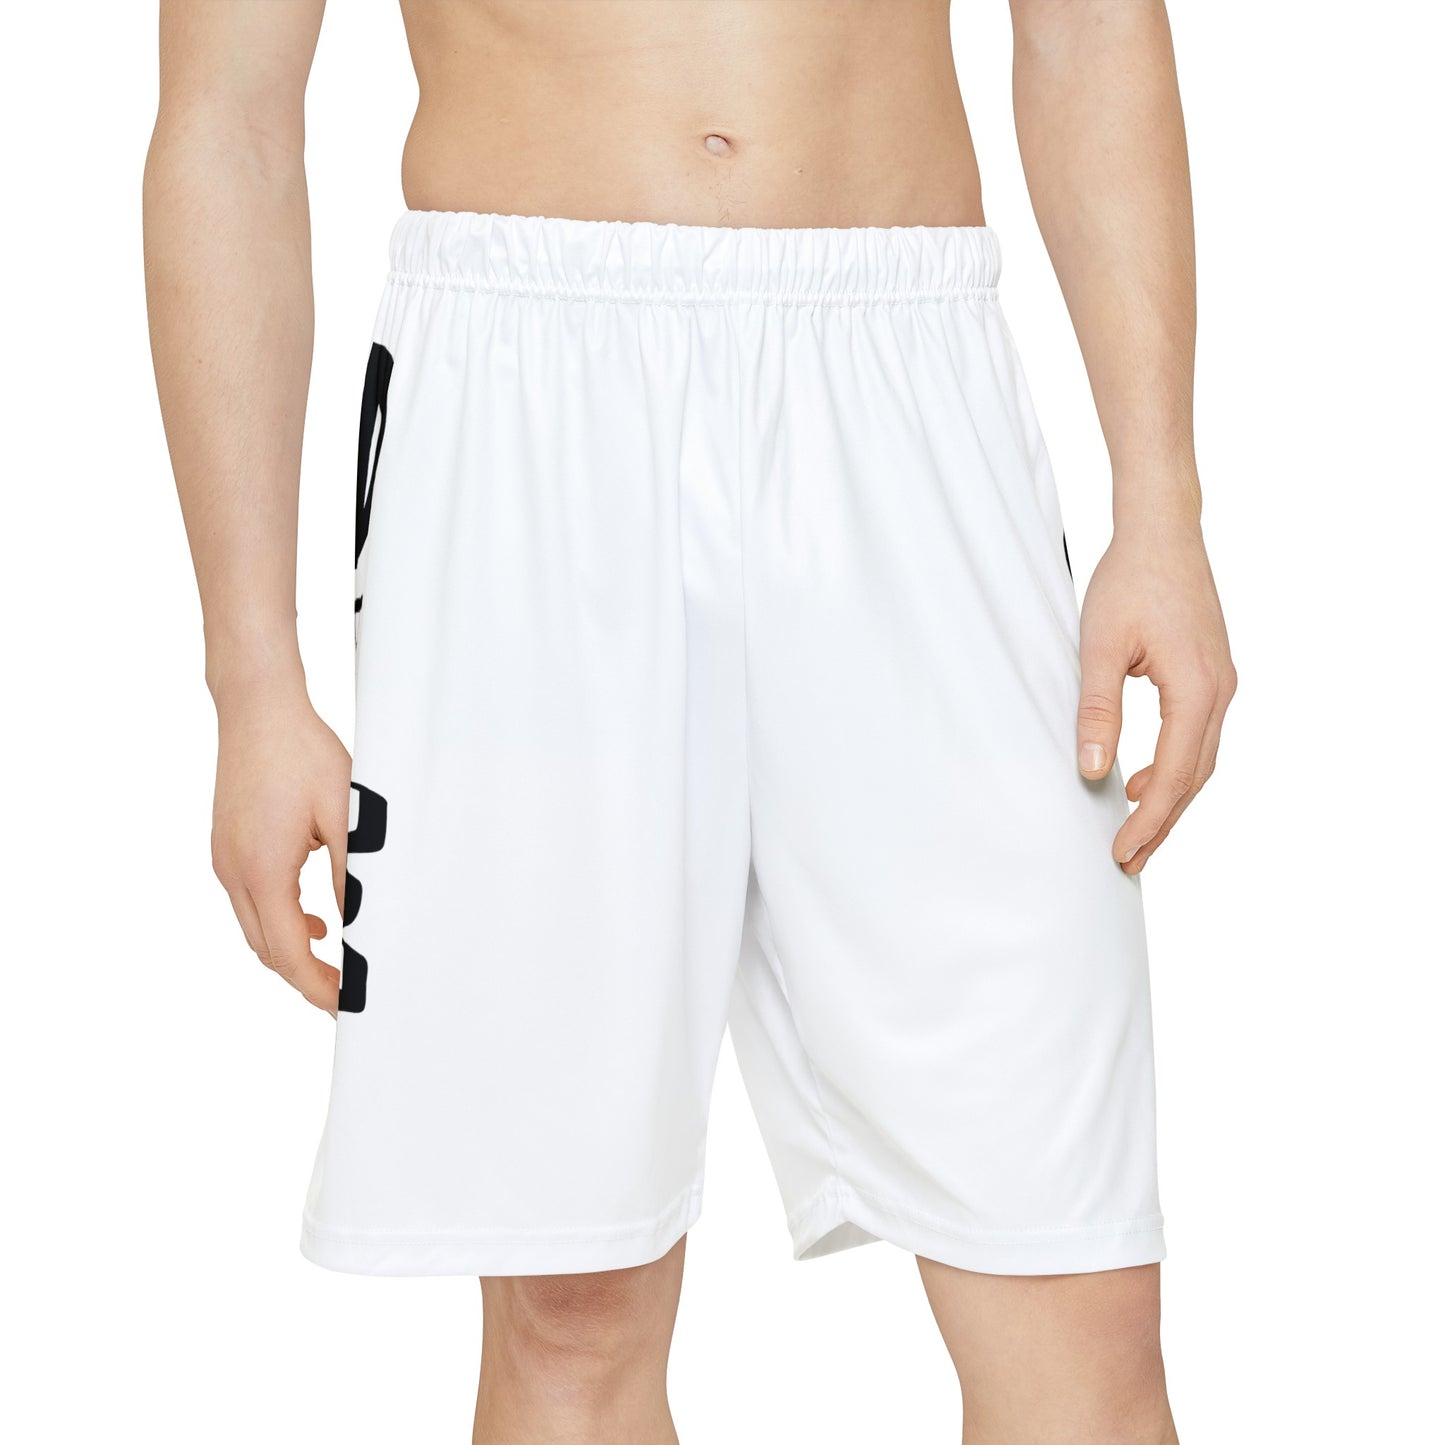 Men’s Sports Shorts God And Time